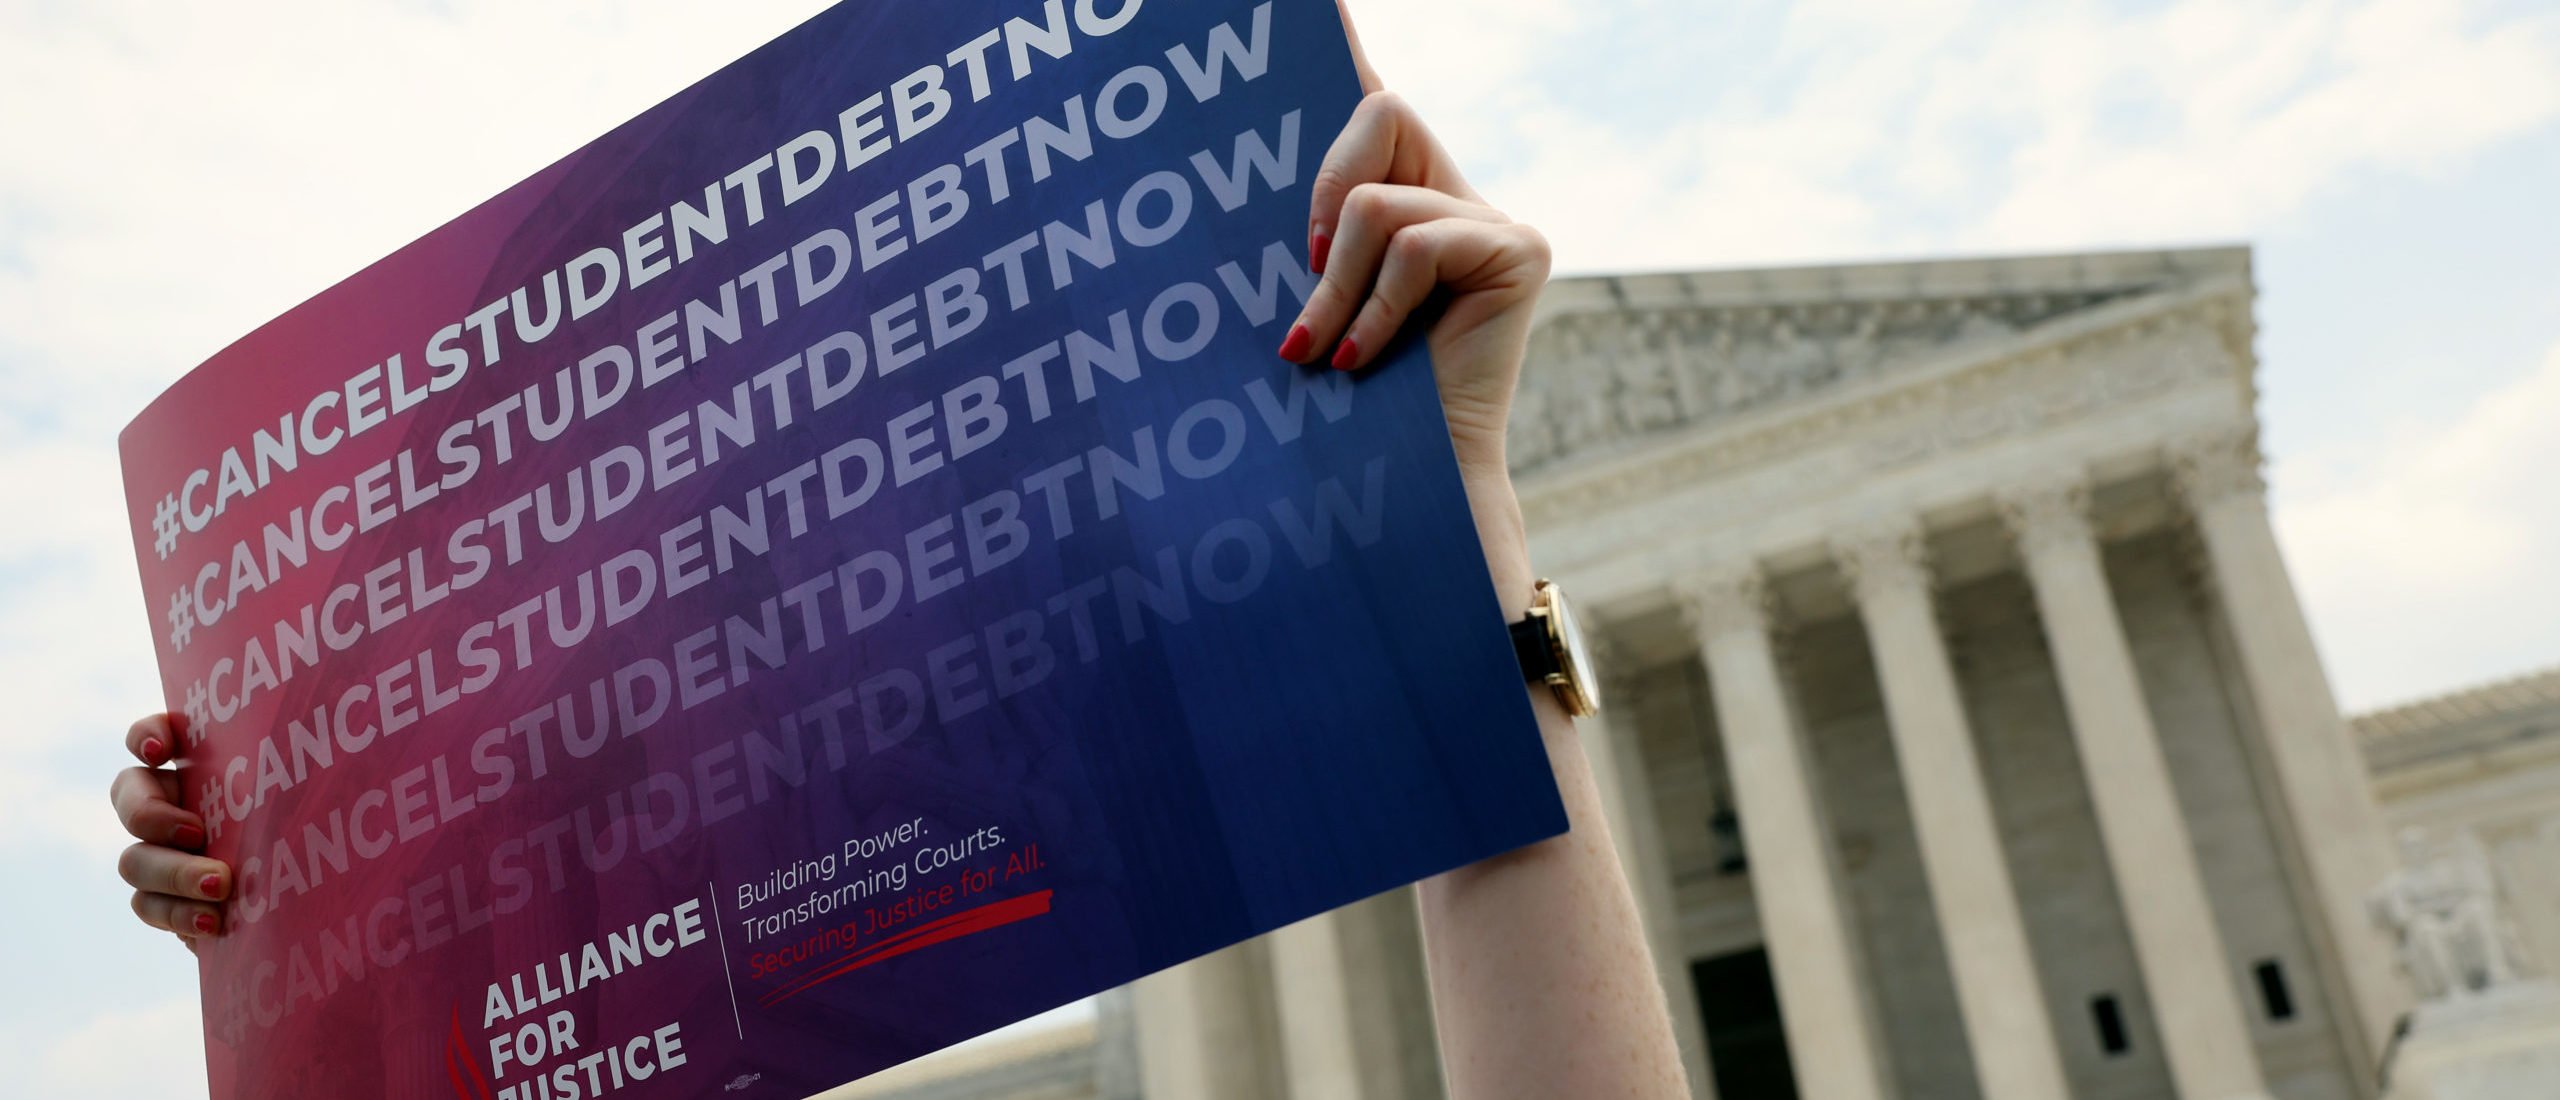 WASHINGTON, DC - JUNE 30: A Student debt relief activist participates in a student debt rally at the U.S. Supreme Court on June 30, 2023 in Washington, DC. In a 6-3 decision the Supreme Court stuck down the Biden administration’s student debt forgiveness program in Biden v. Nebraska. (Photo by Kevin Dietsch/Getty Images)